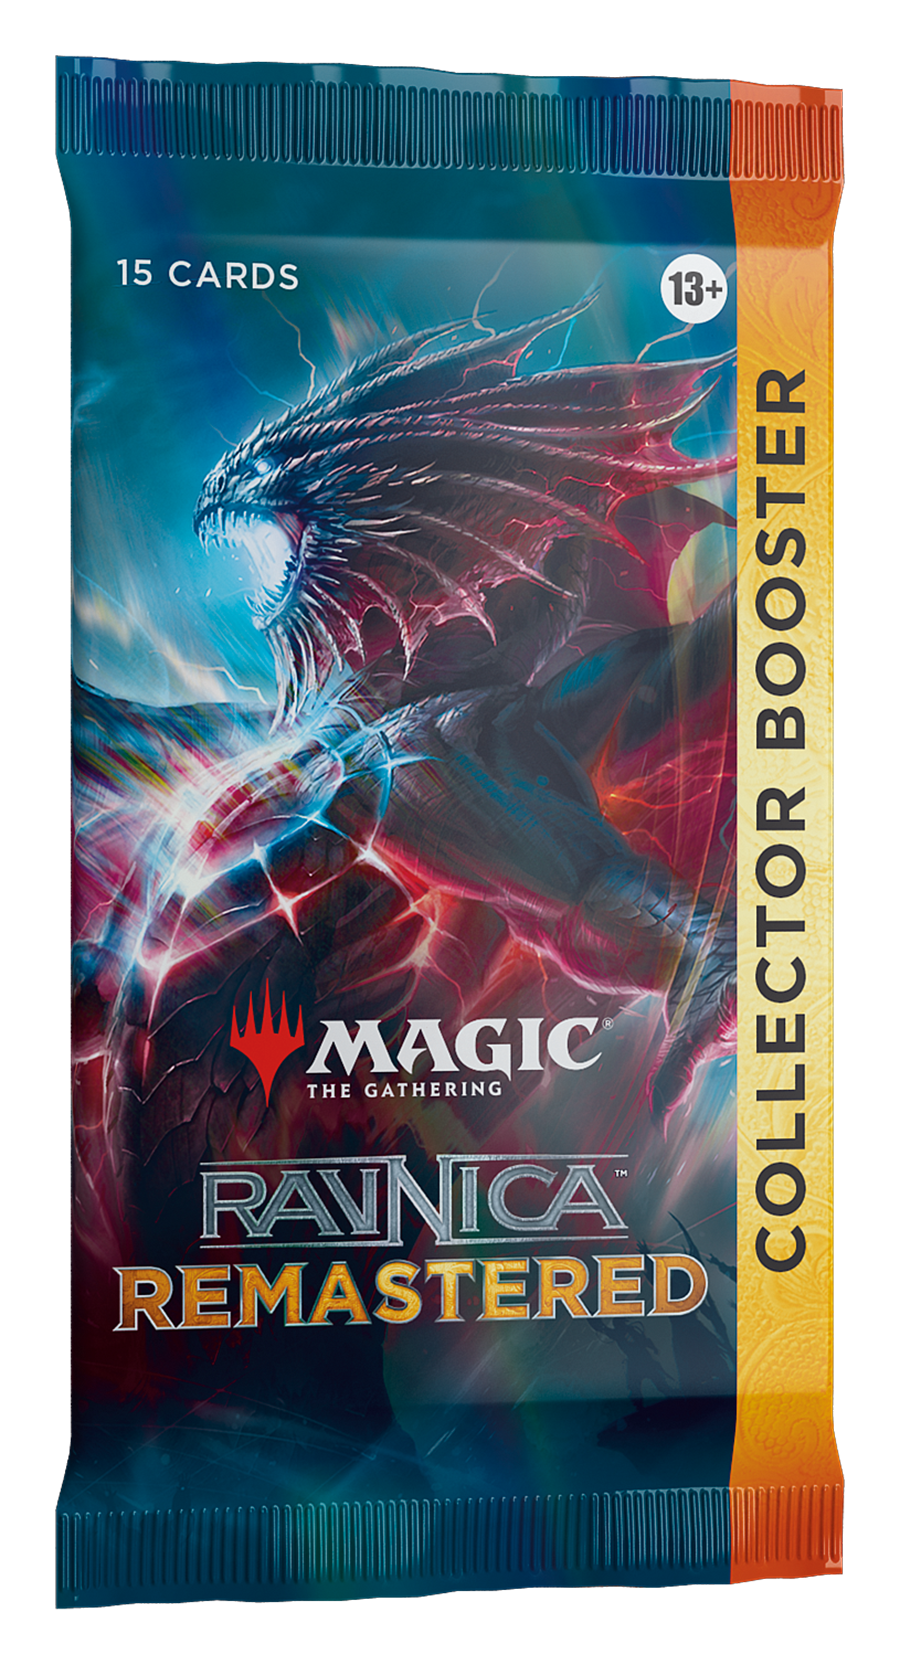 Collector Booster